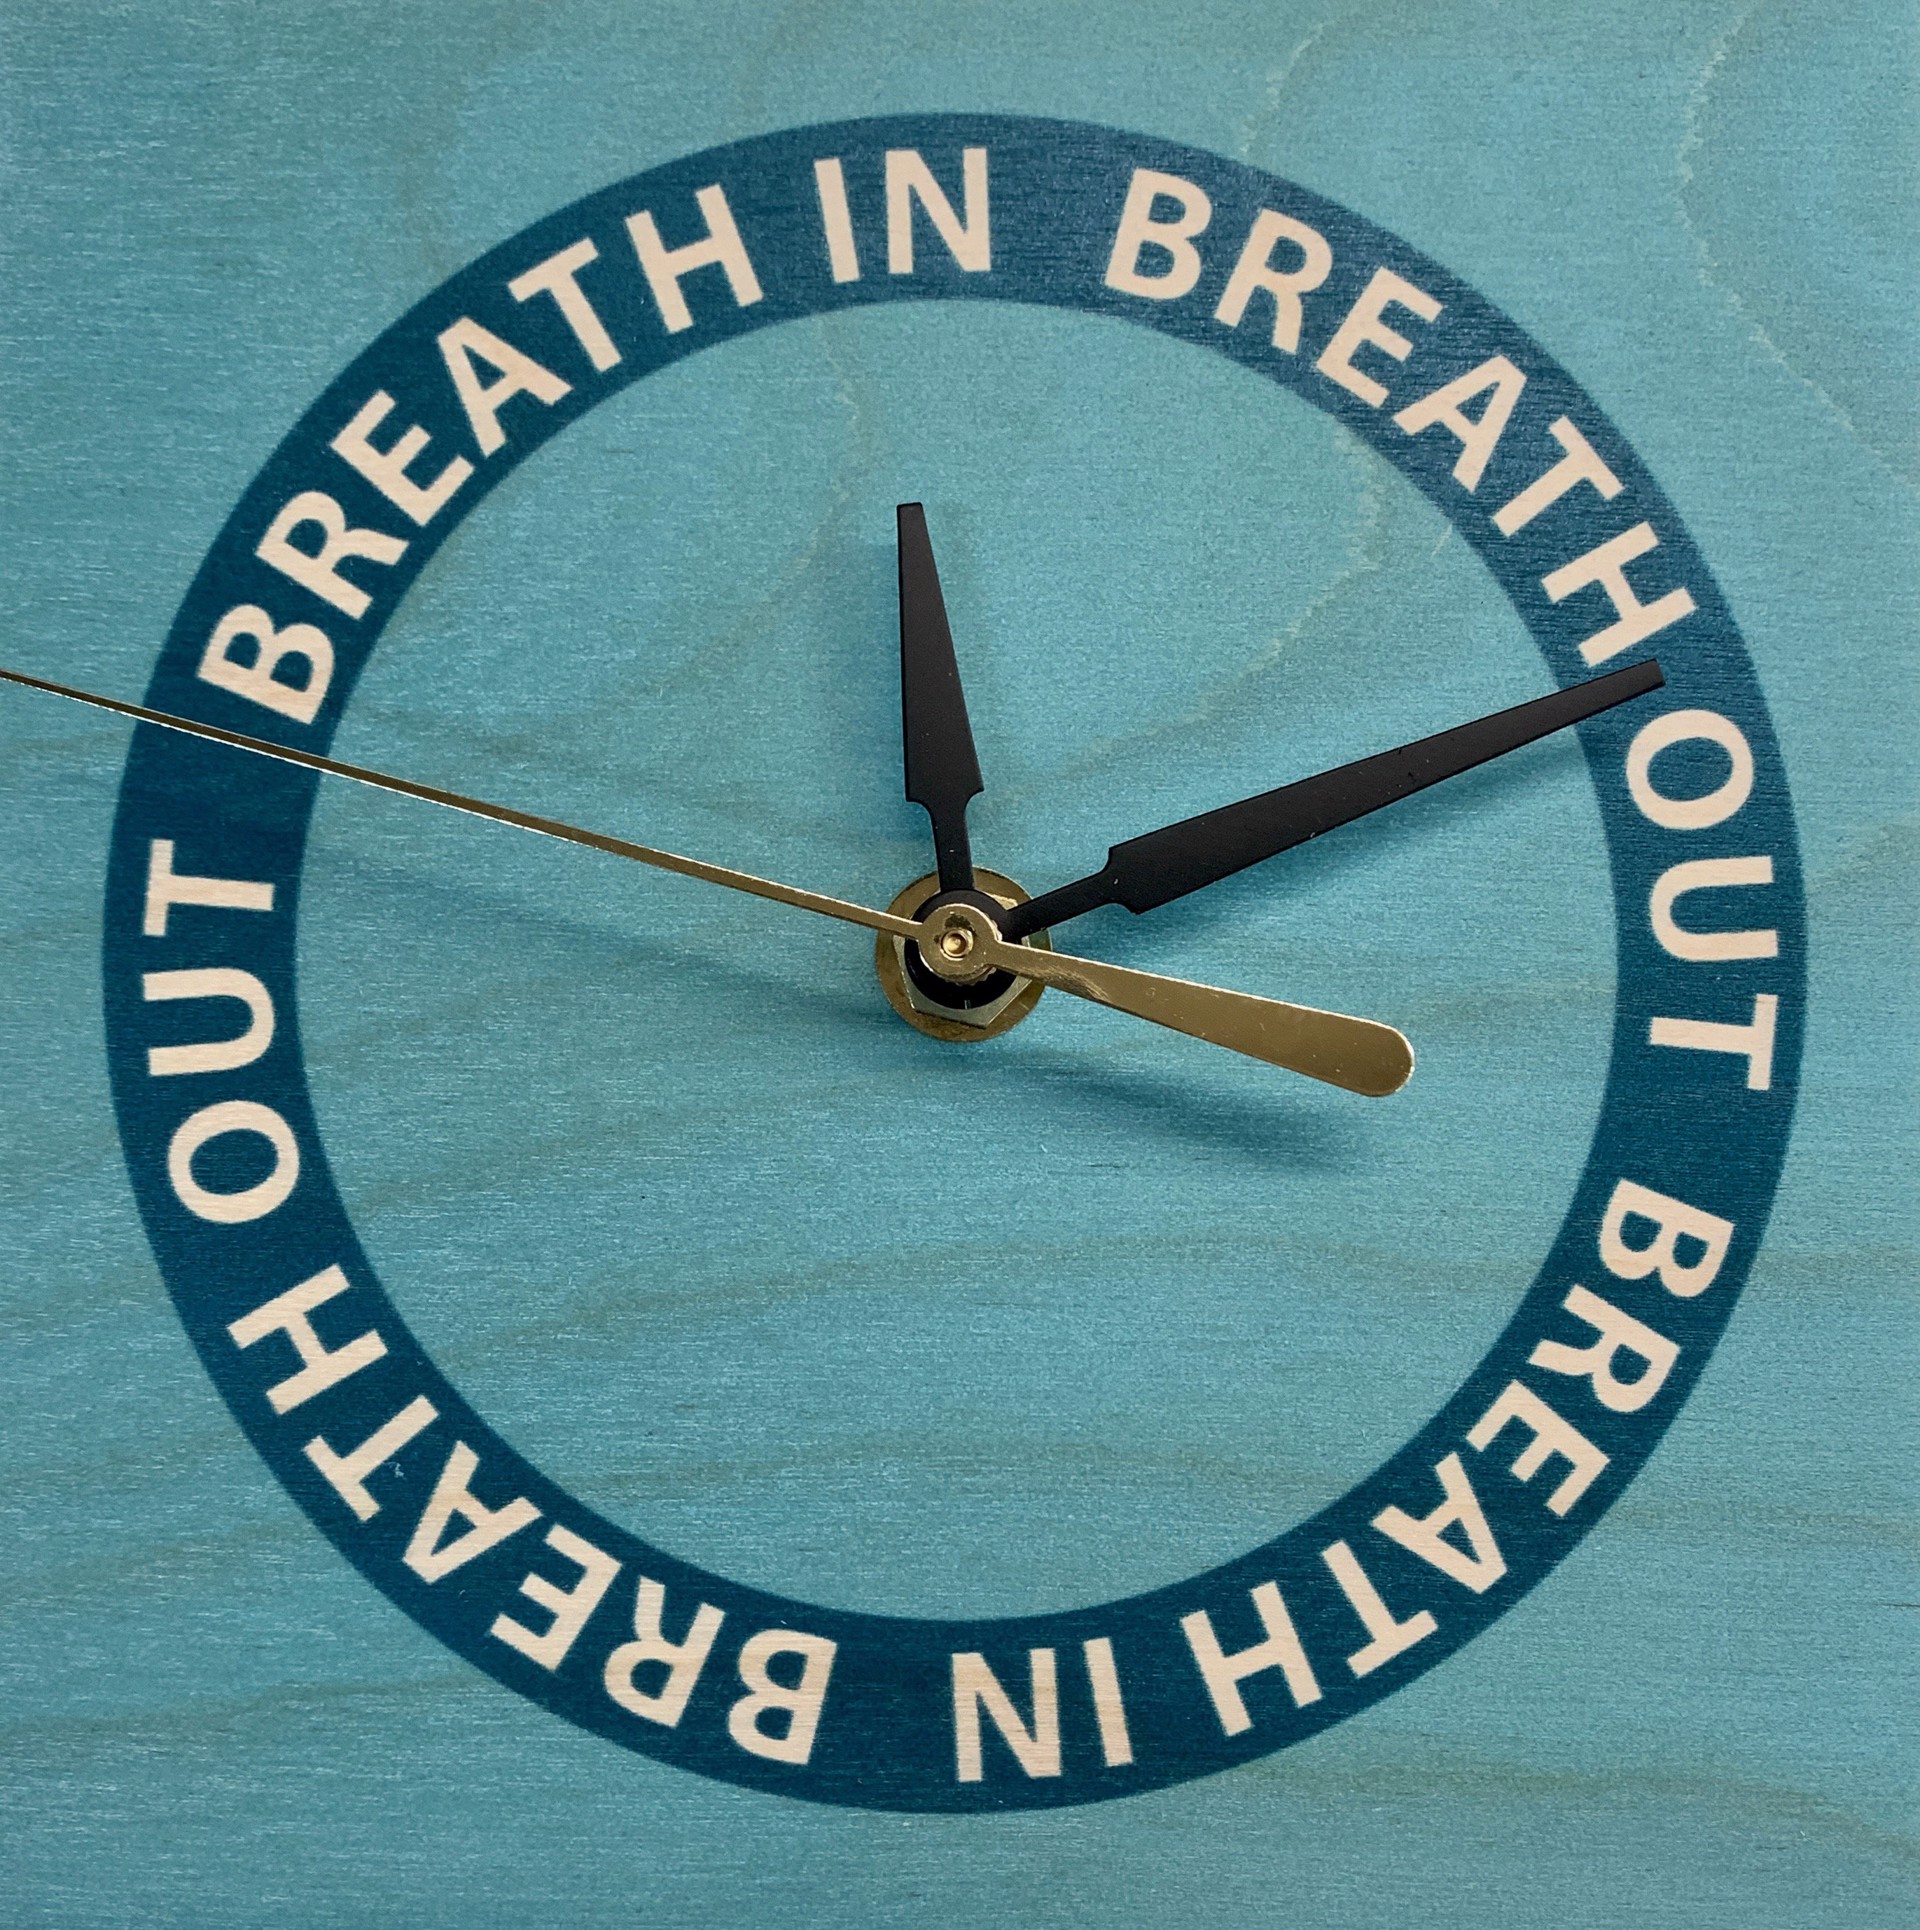 Lifecycles Phase 3, breath in breath out by Stephen Anderson